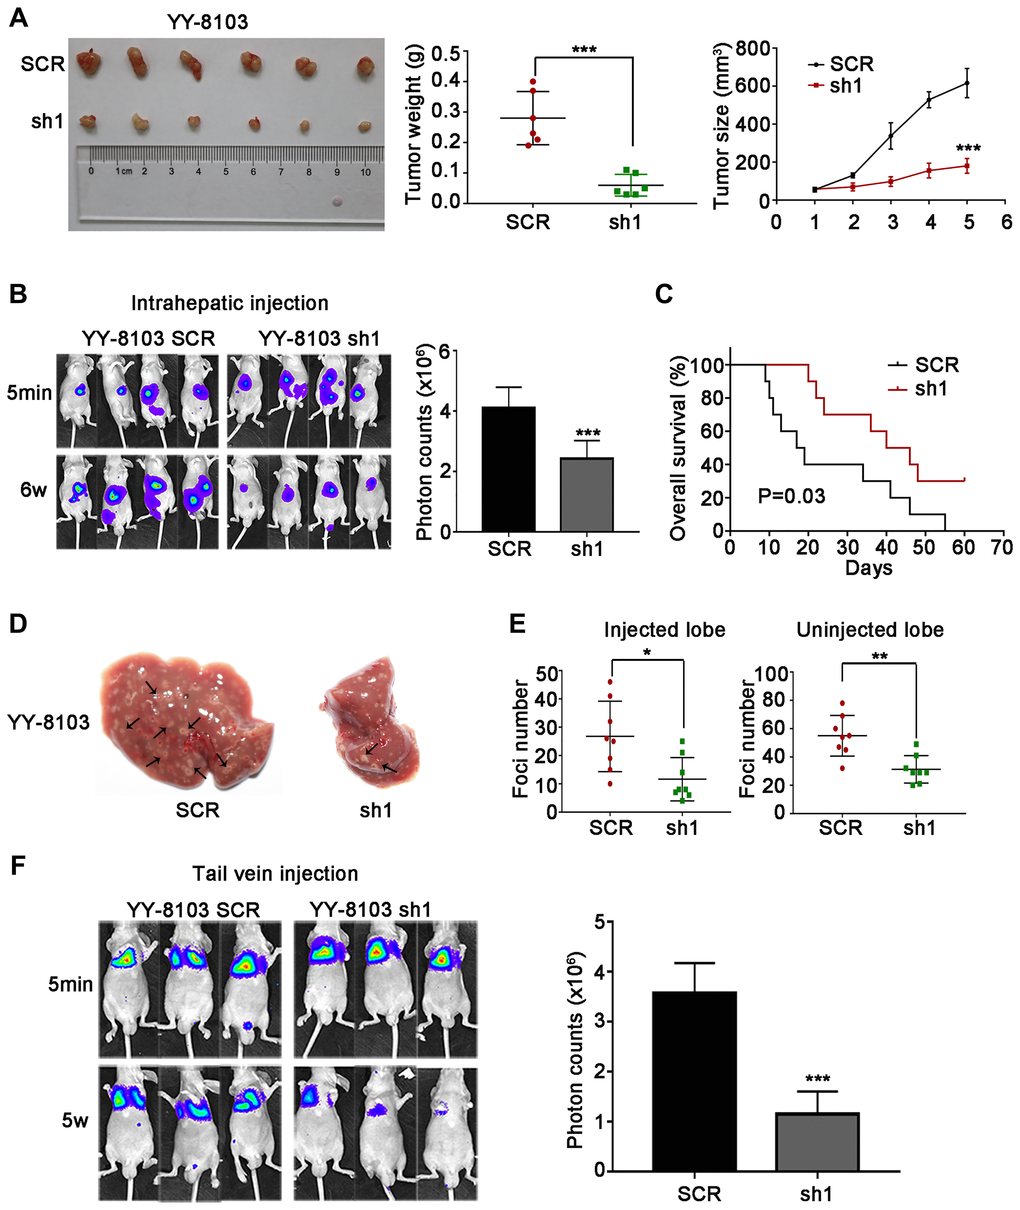 NET1 knockdown suppresses HCC tumorigenesis, and inhibits intrahepatic and lung metastases in vivo. (A) Left panel: representative images of tumors generated by control and NET1-knocked down YY-8103 cells. Middle panel: tumor weight (g). Right panel: tumor growth (mm3). (B) Left panel: representative images showing luciferase expression in intrahepatic tumors of mice from YY-8103 control and shNET1 groups. Right panel: quantification of luciferase expression in intrahepatic tumors. (C) Survival curves of mice in YY-8103 control and shNET1 groups. (D) Representative images of mice livers from YY-8103 control and shNET1 groups with intrahepatic injection. (E) Foci number of injected (left image) and non-injected (right image) lobes of mice with intrahepatic metastasis. (F) Left image: representative images showing luciferase expression from metastasized lungs of mice from YY-8103 control and shNET1 groups. Right image: quantification of luciferase expression in metastasized lungs. All data are presented as mean ± SE. *P **P ***P 